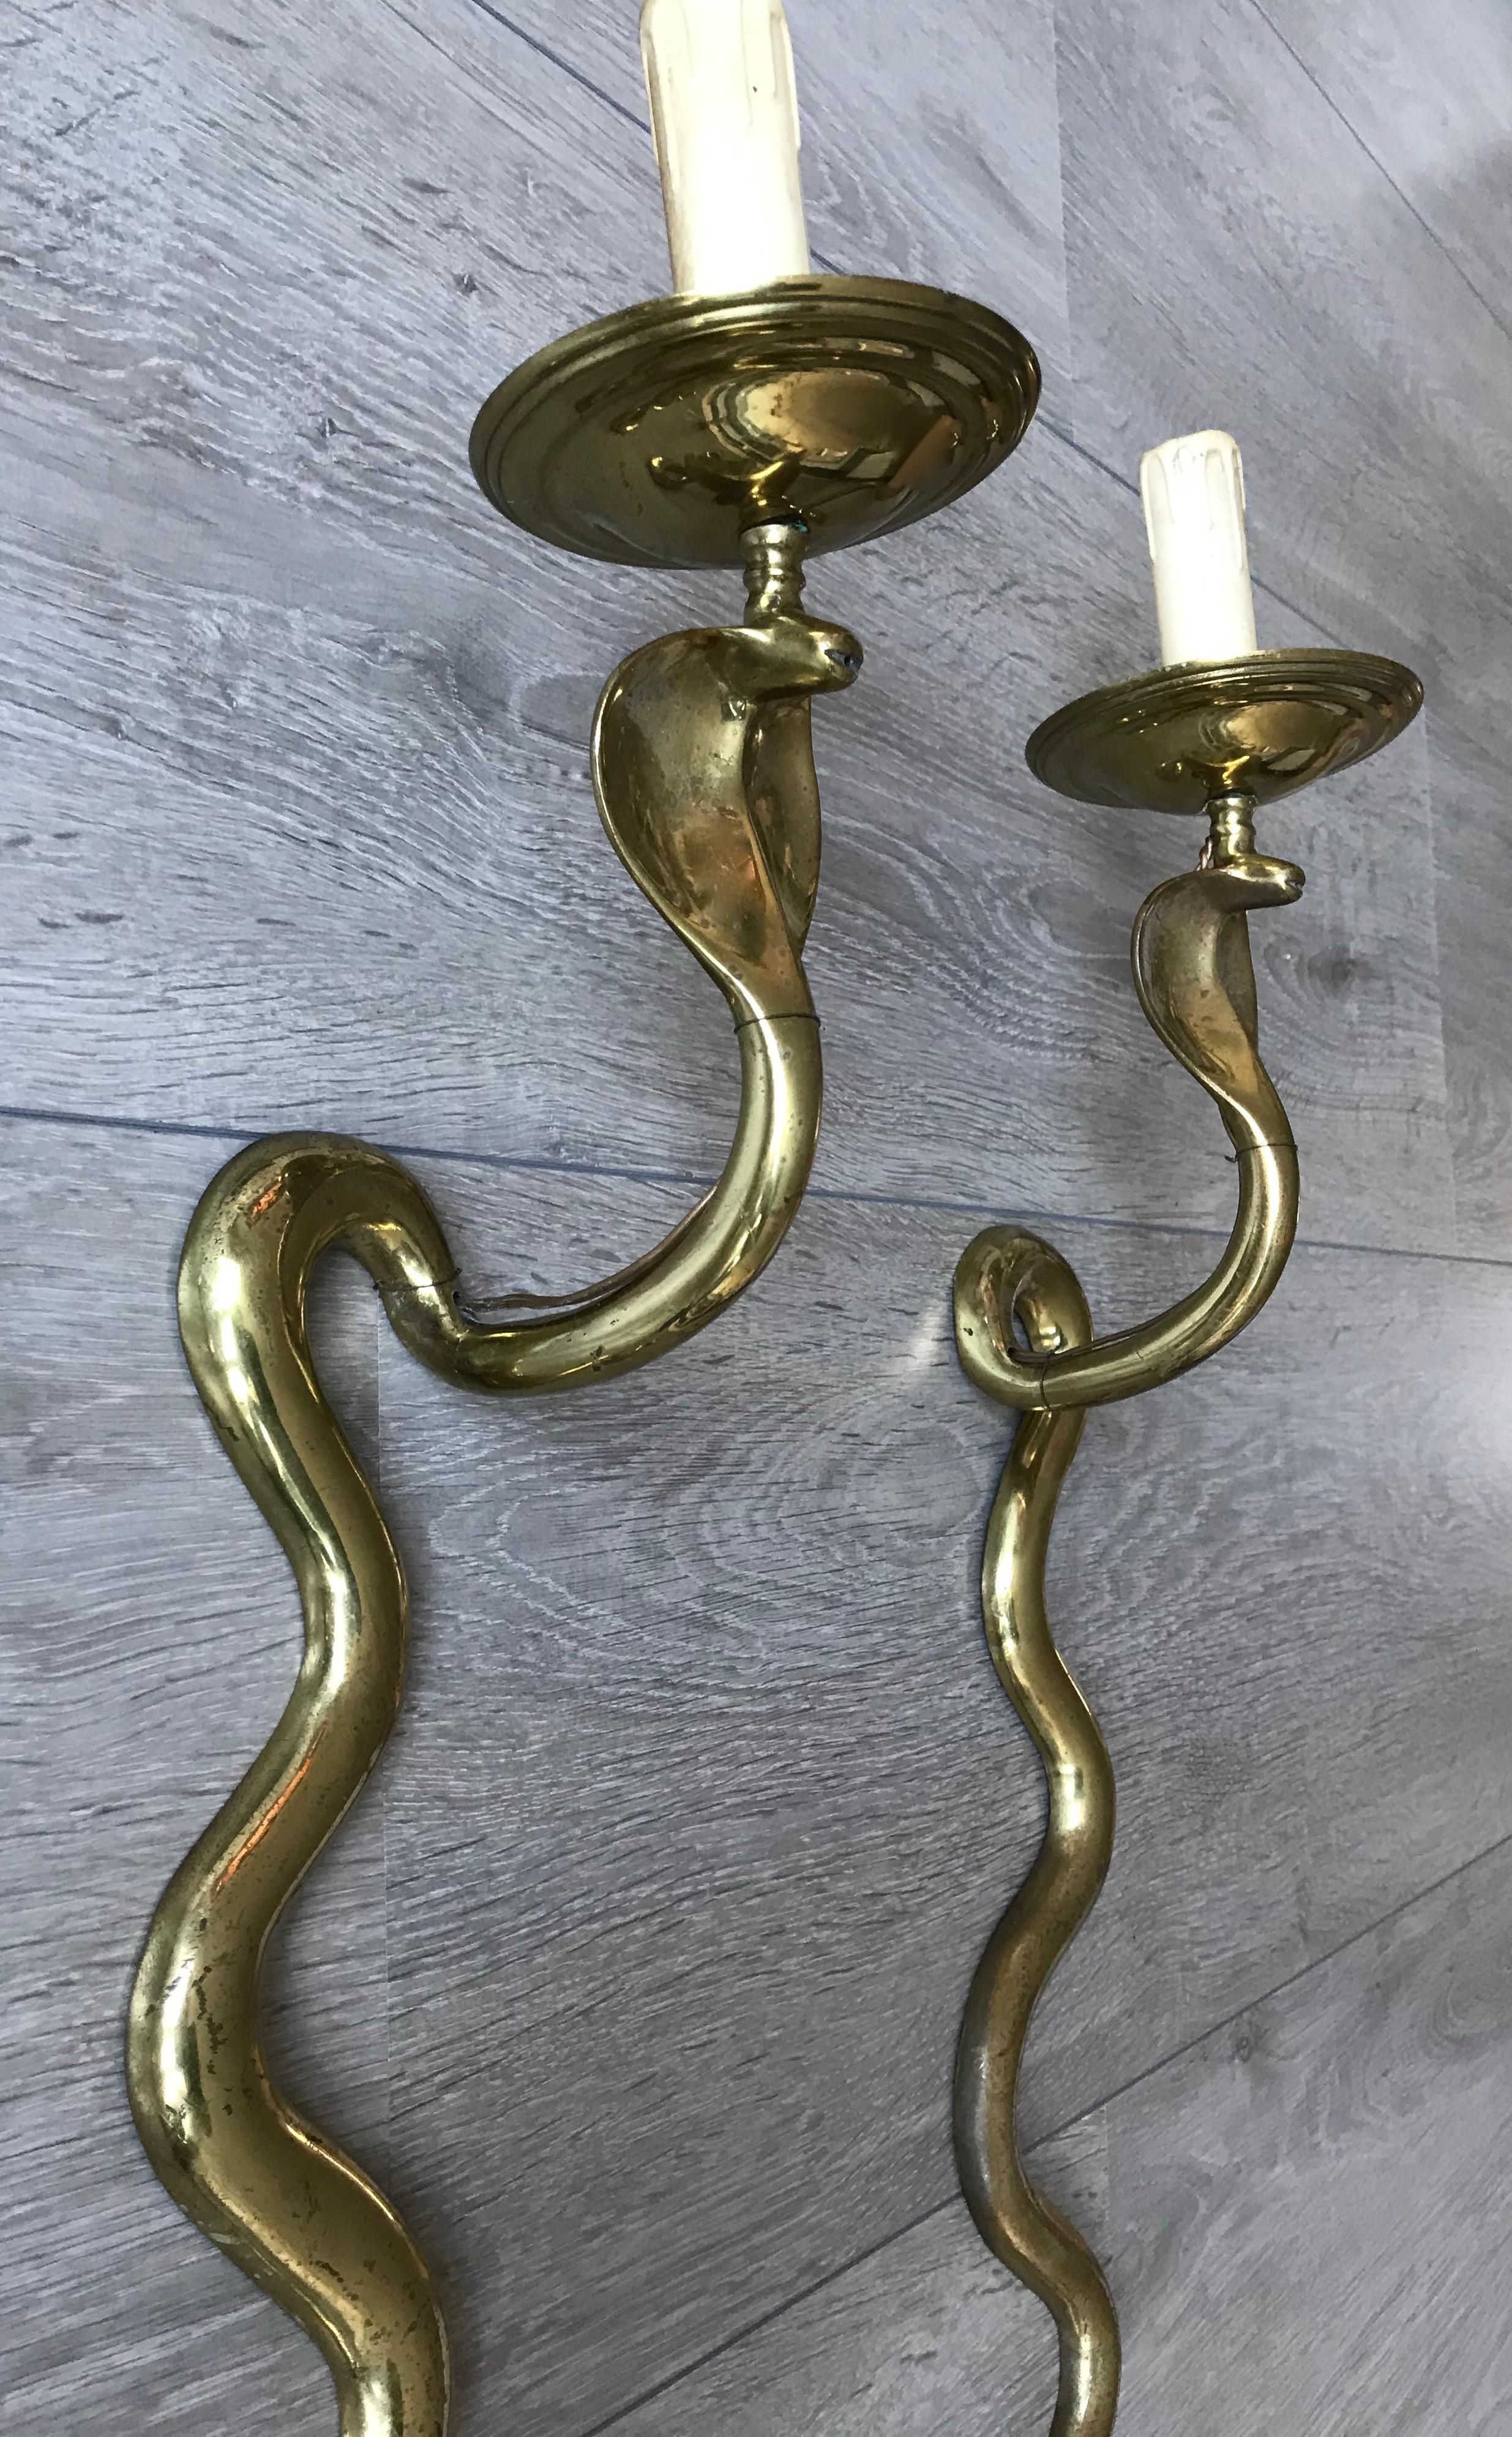 Hand-Crafted Striking and Stylish Midcentury Pair of Hollywood Regency Cobra / Snake Sconces